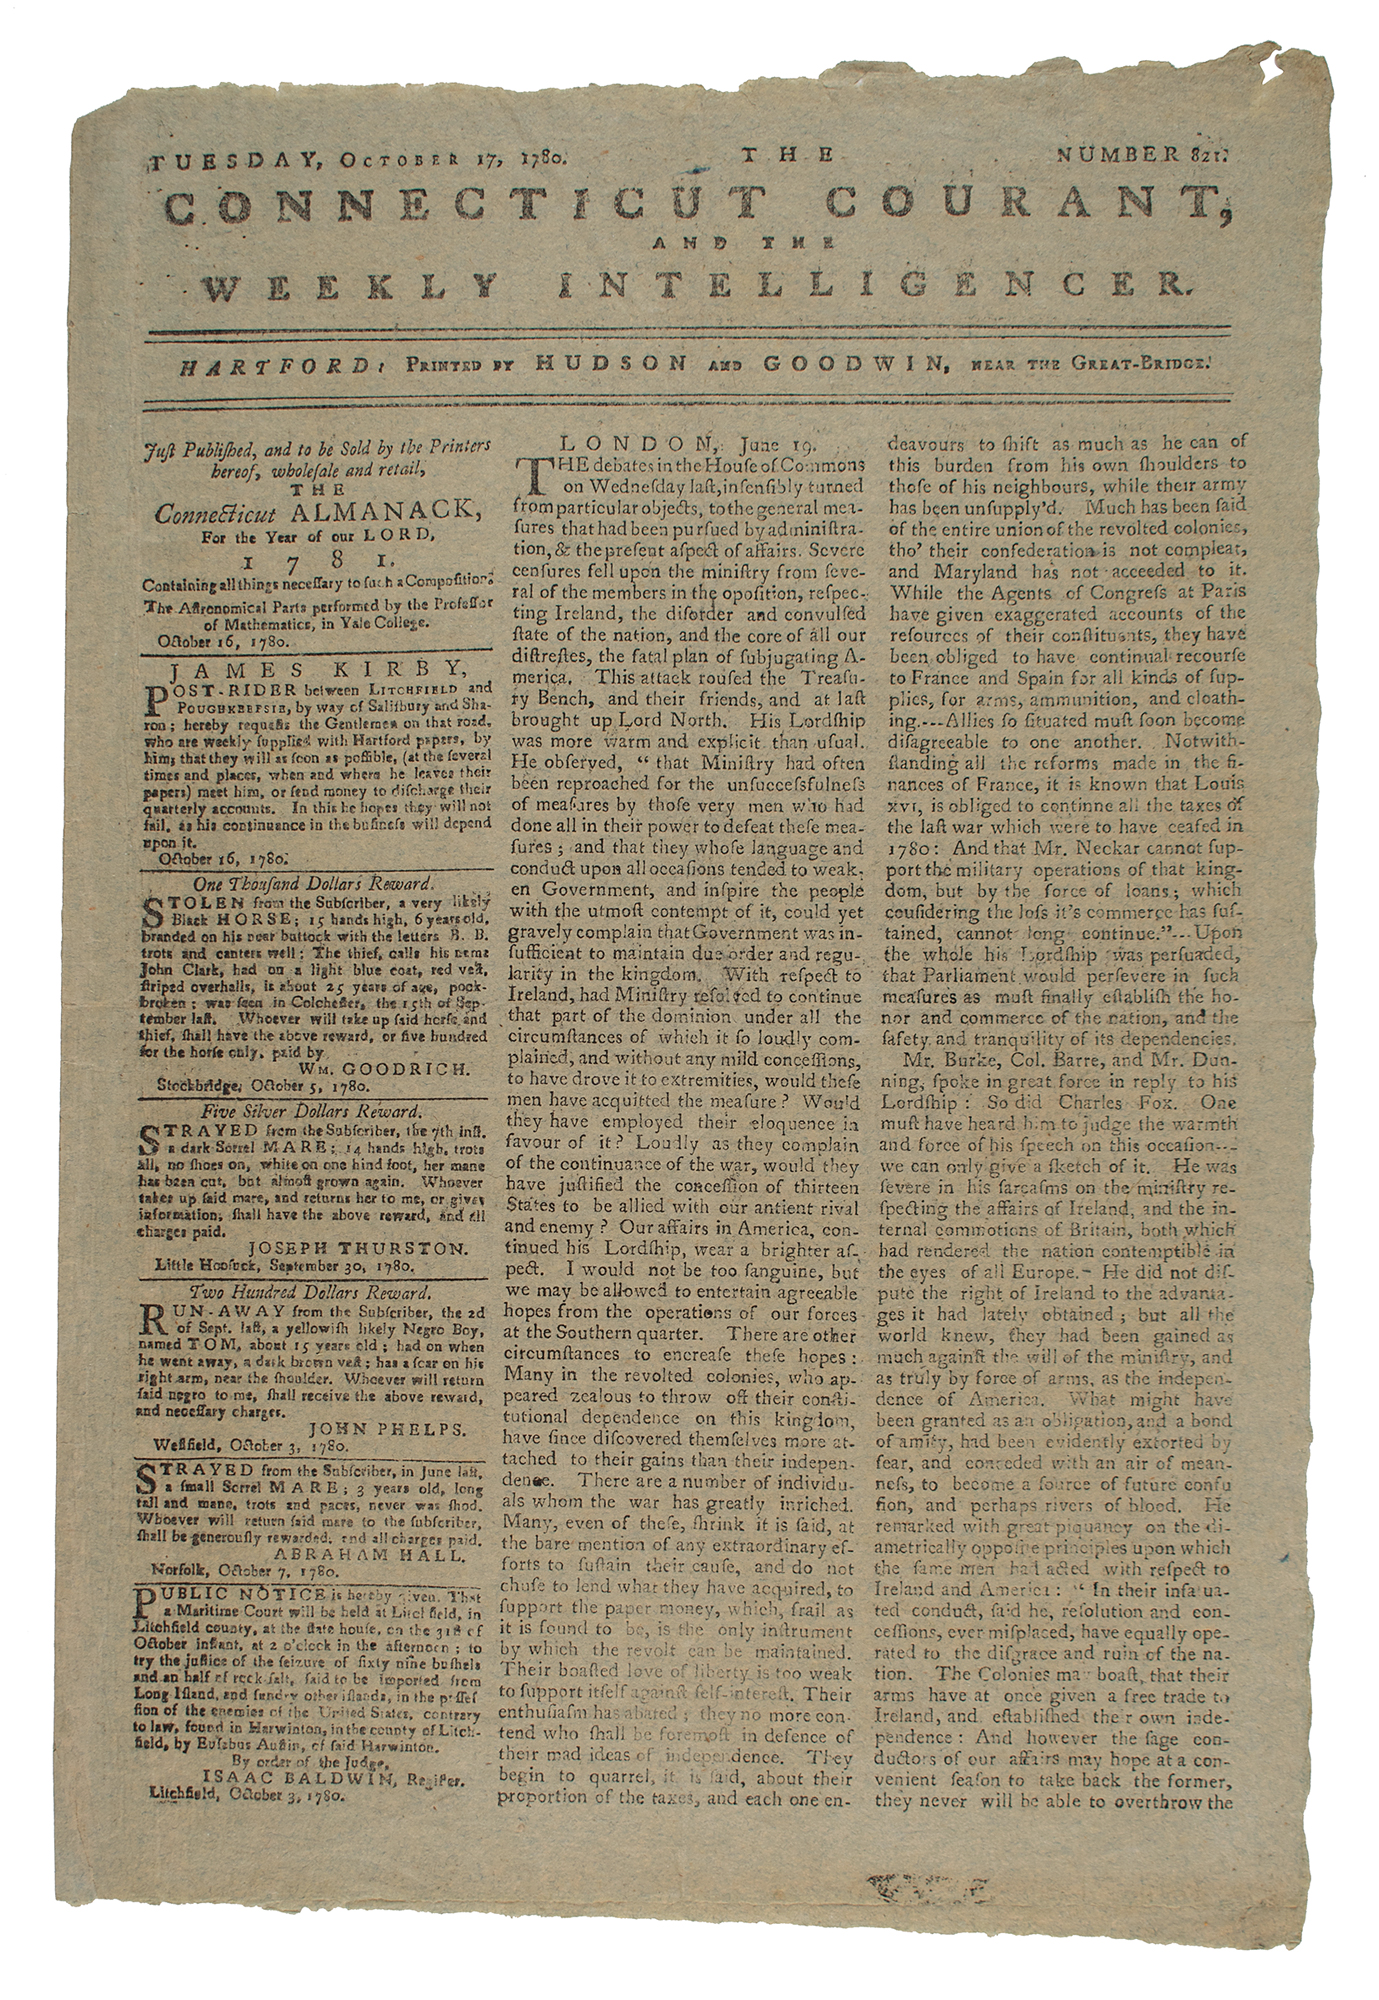 Lot #532 The Connecticut Courant, and the Weekly Intelligencer (October 17, 1780)